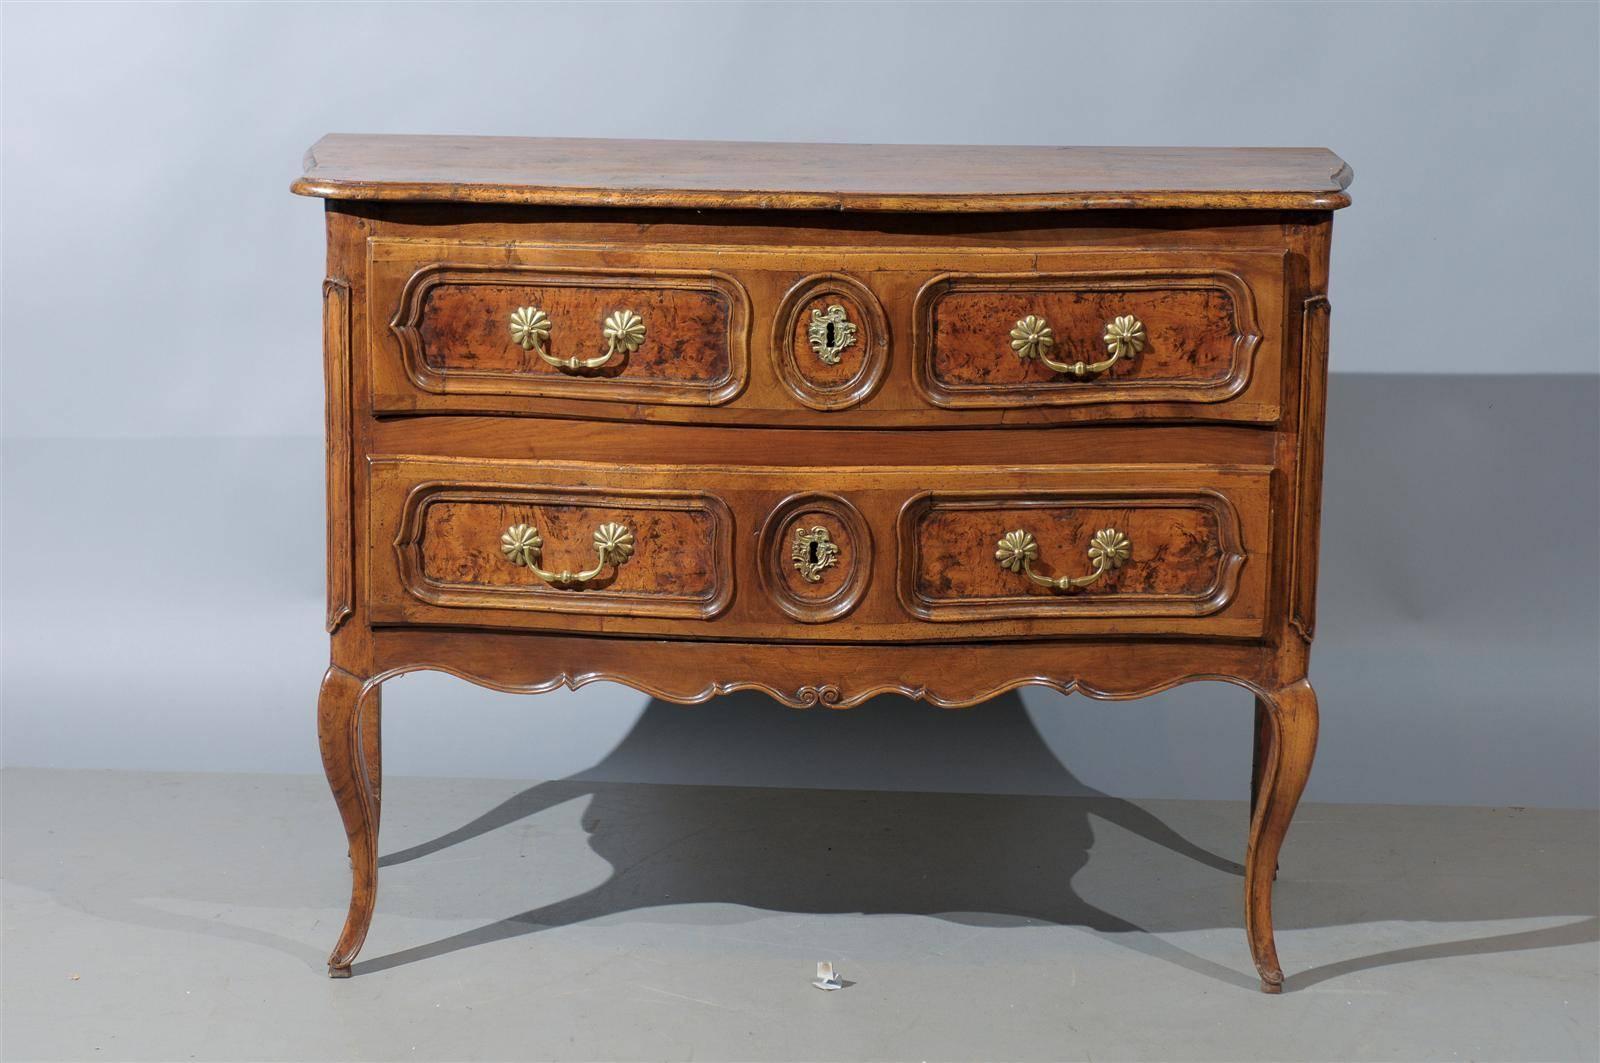 18th century French Louis XV walnut two-drawer commode with burled walnut panels & saber legs, Bresse, circa 1760. 

.